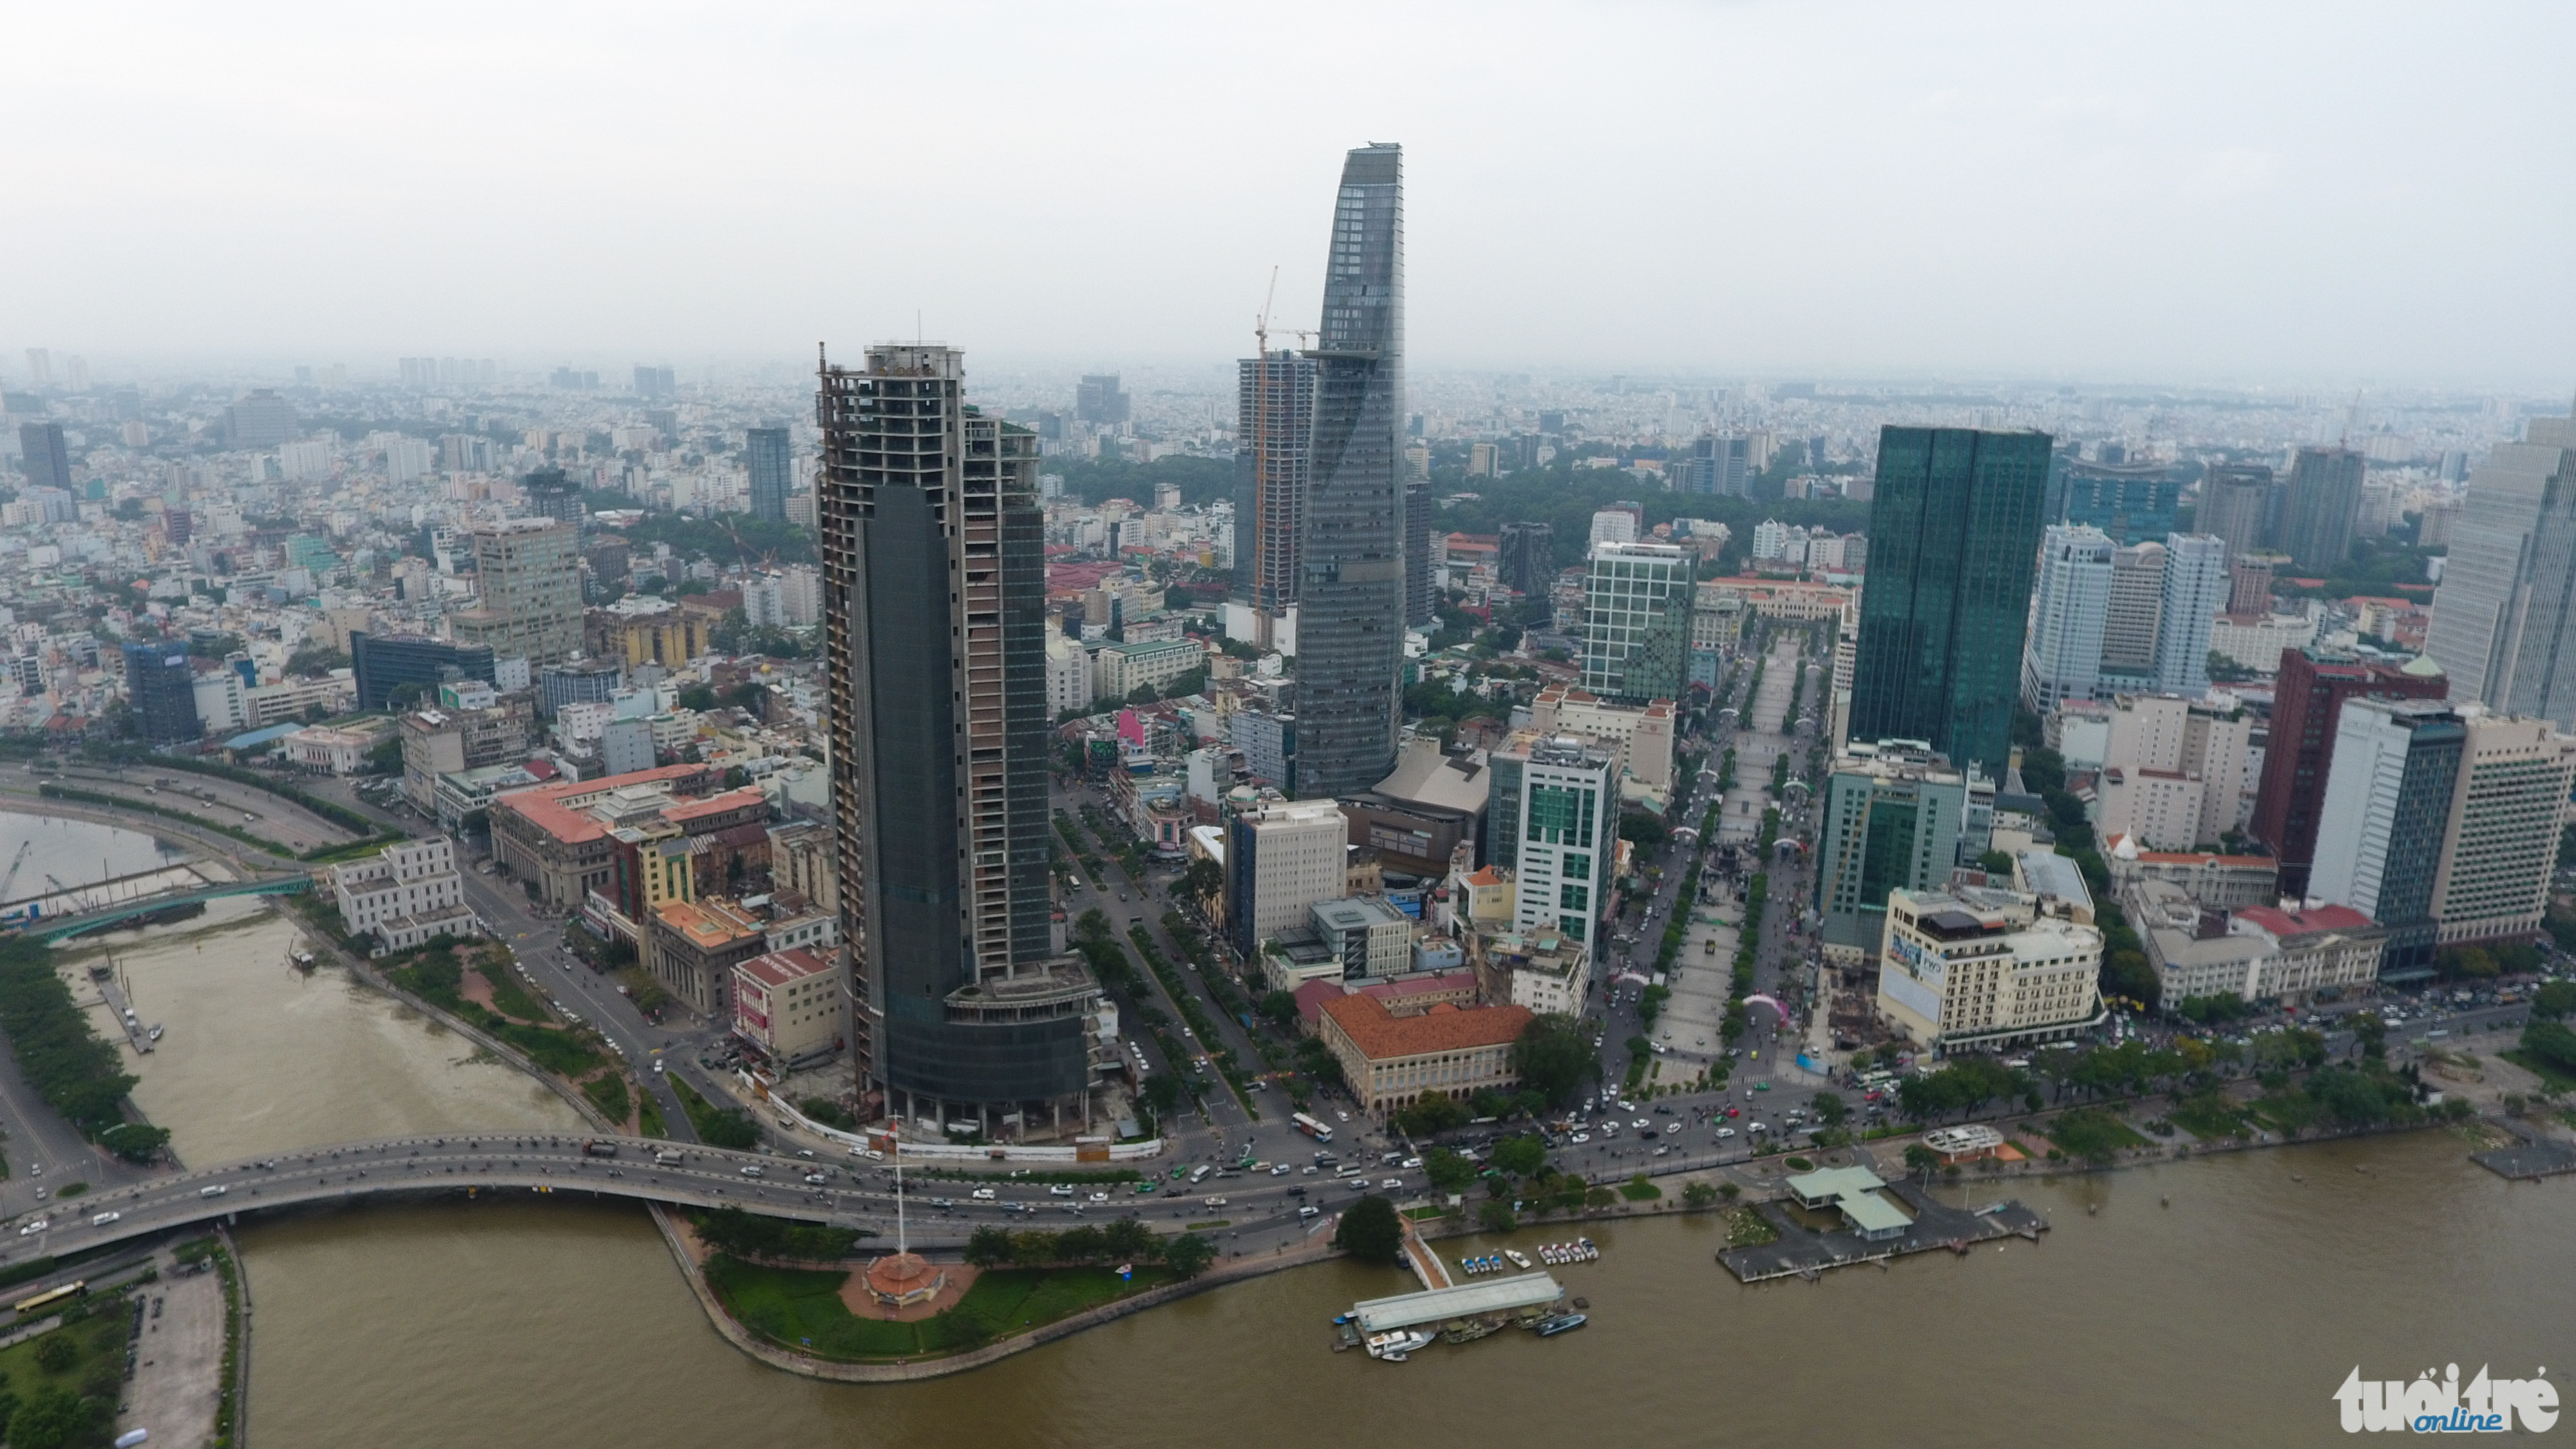 The Saigon One Tower is located near the Bitexco Financial Tower, the city’s highest building and iconic architecture.